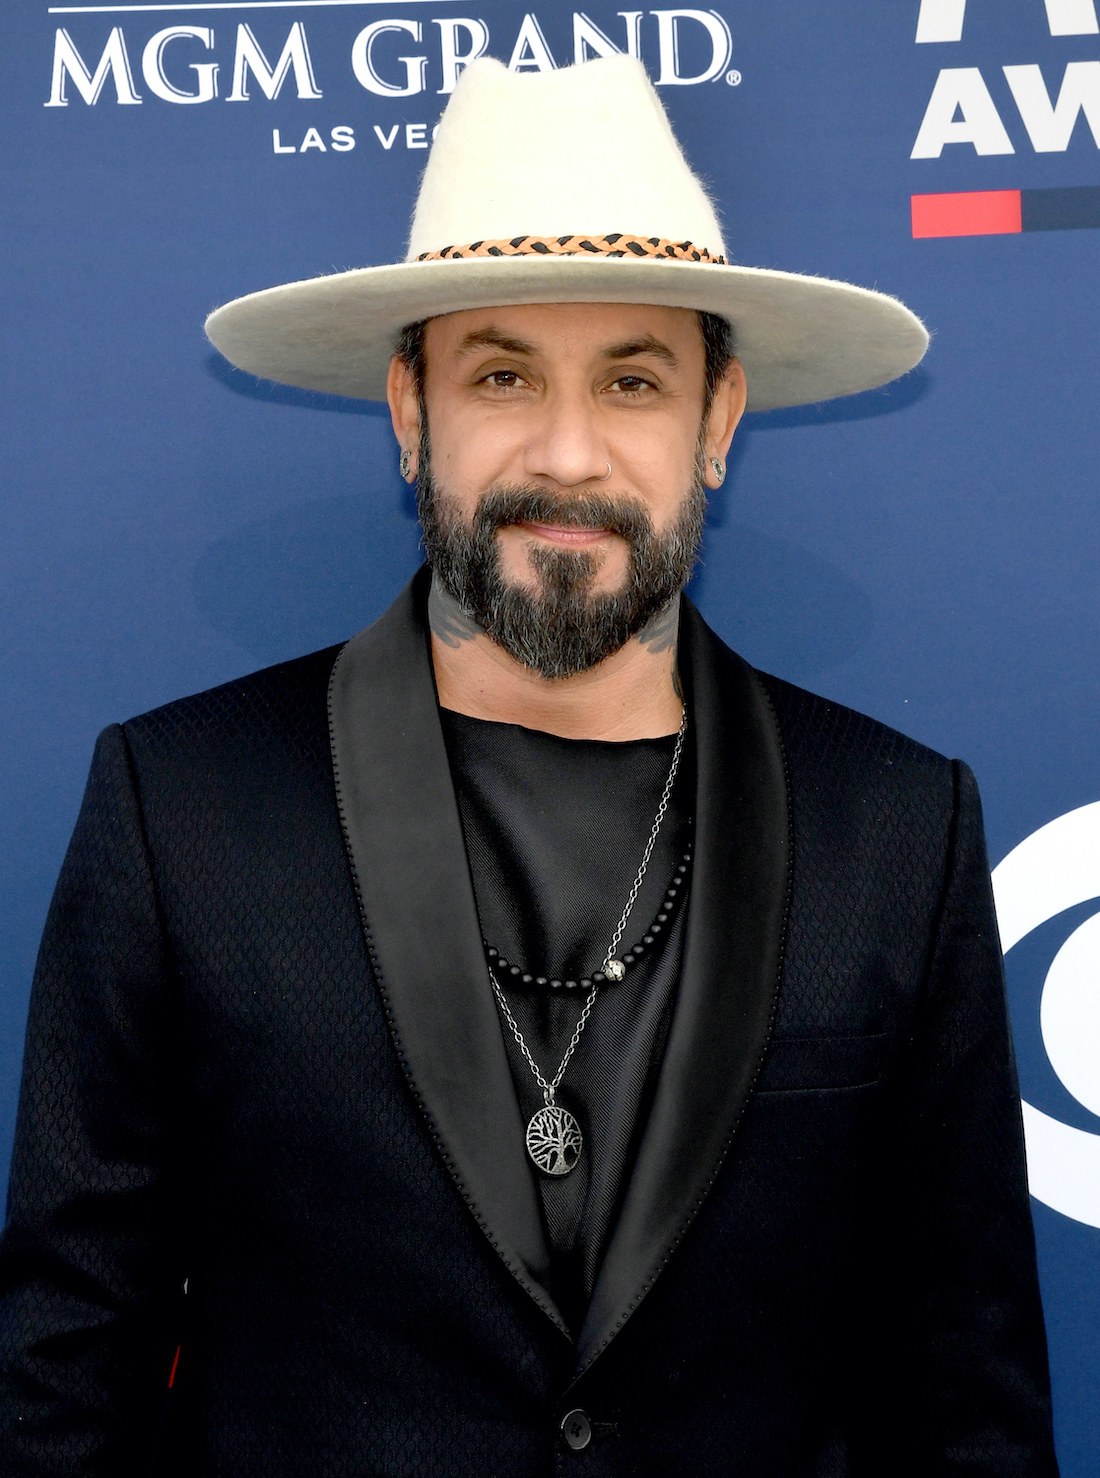 AJ McLean wears a suit, pendant, and brimmed hat at a red carpet event